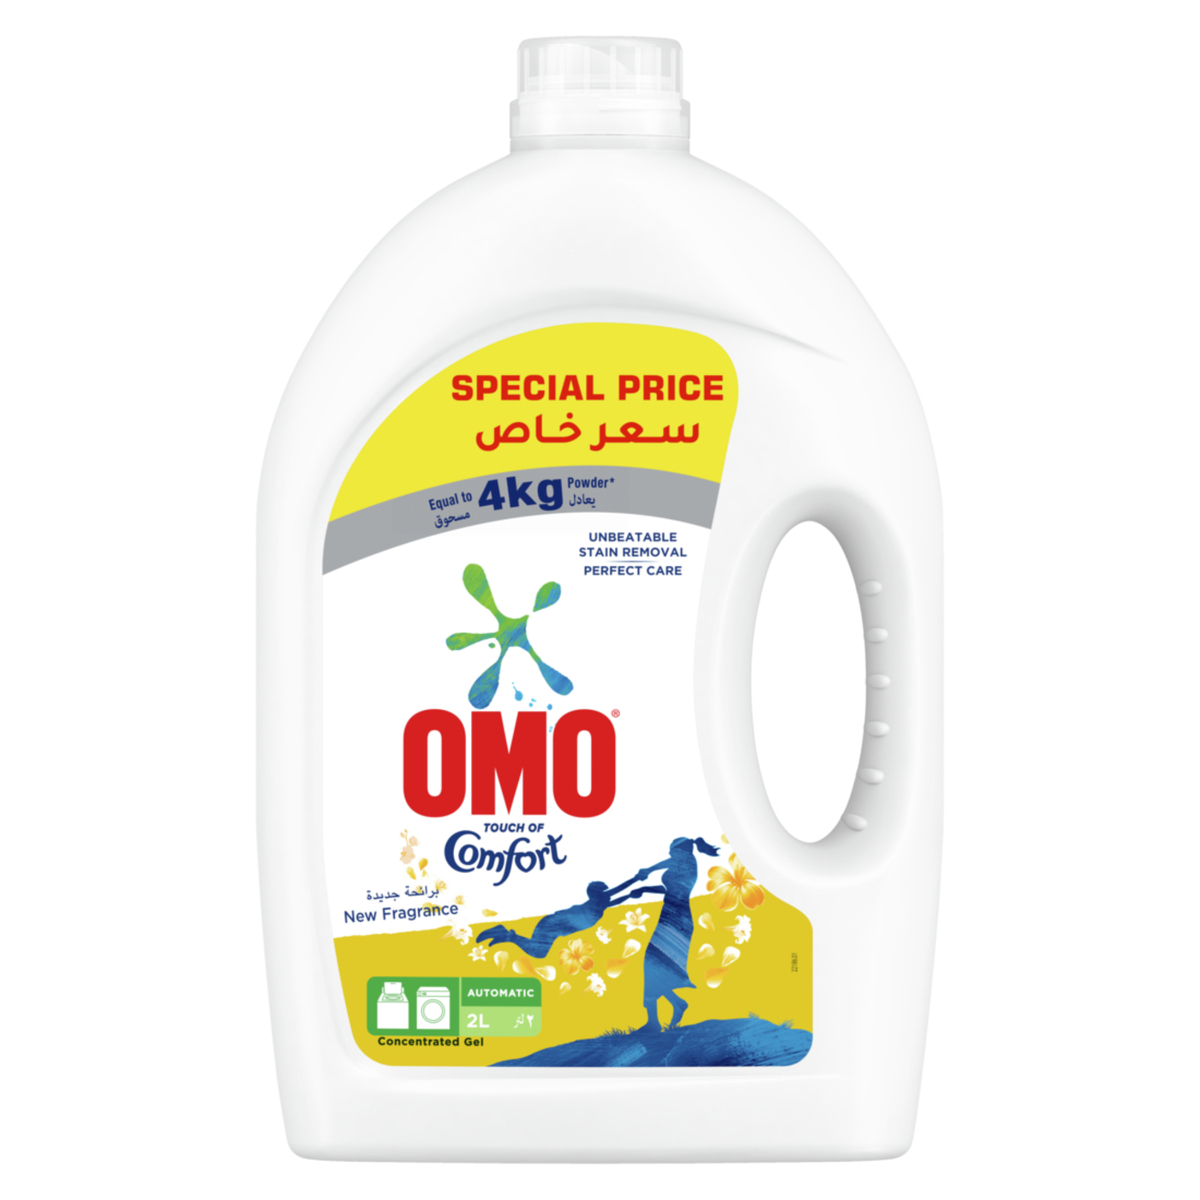 Omo Automatic Concentrated Touch of Comfort Liquid Detergent Value Pack 2Litre